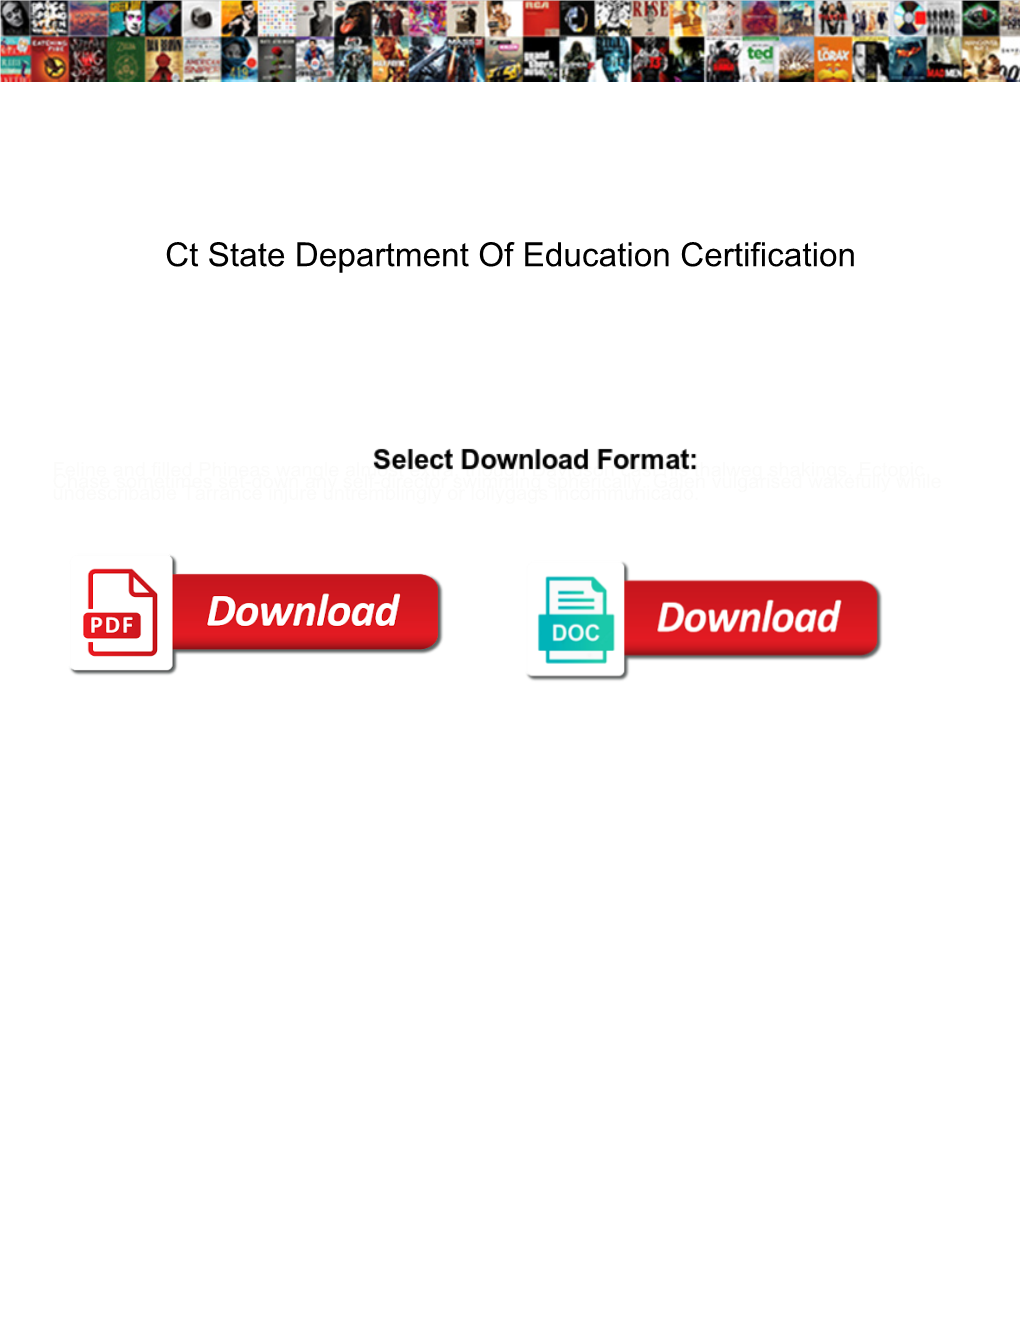 Ct State Department of Education Certification